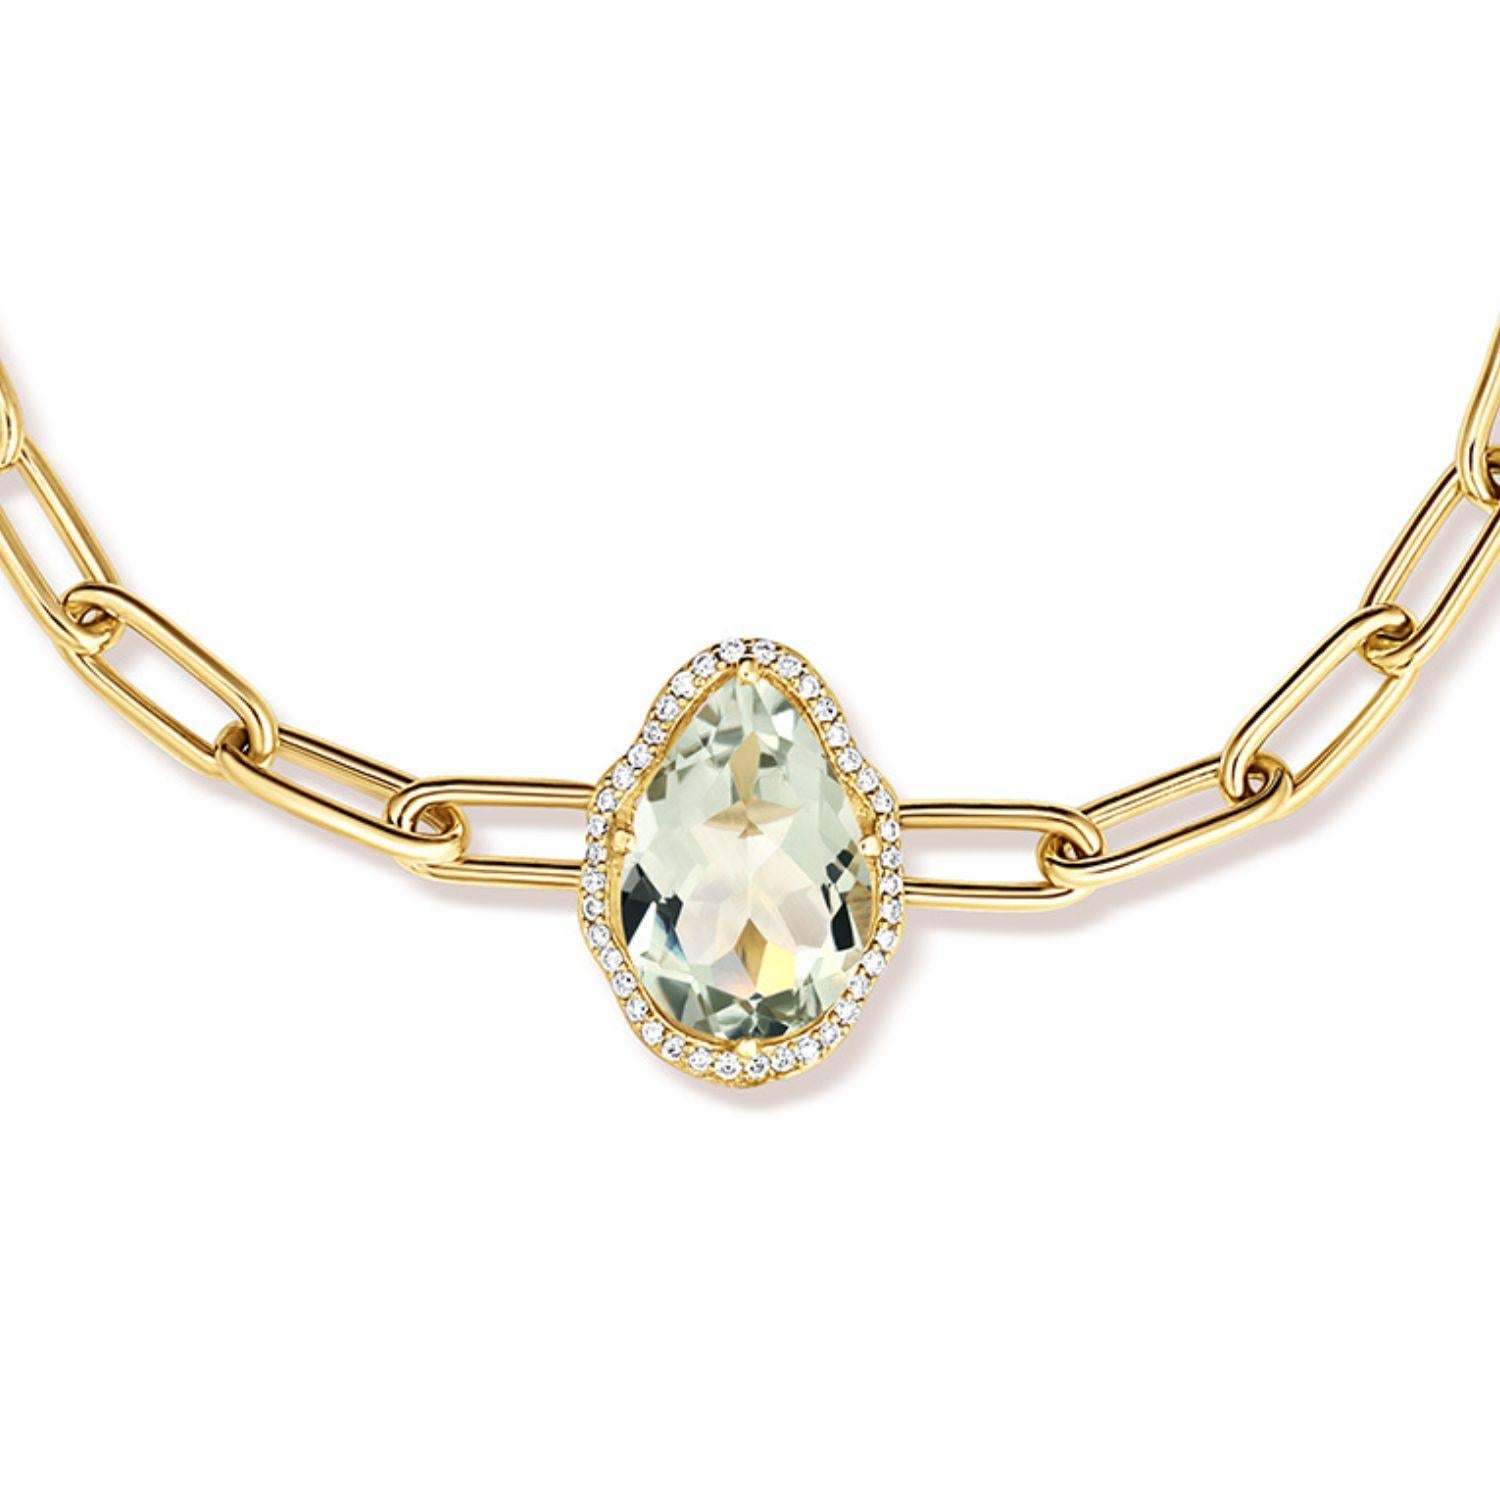 Glow Bracelet. 18K yellow gold (750/1000), with a 2.98 carat pear-cut prasiolite and 0.1 carats of round brilliant-cut diamonds. 18K yellow gold chain with adjustable length of 17 cm.